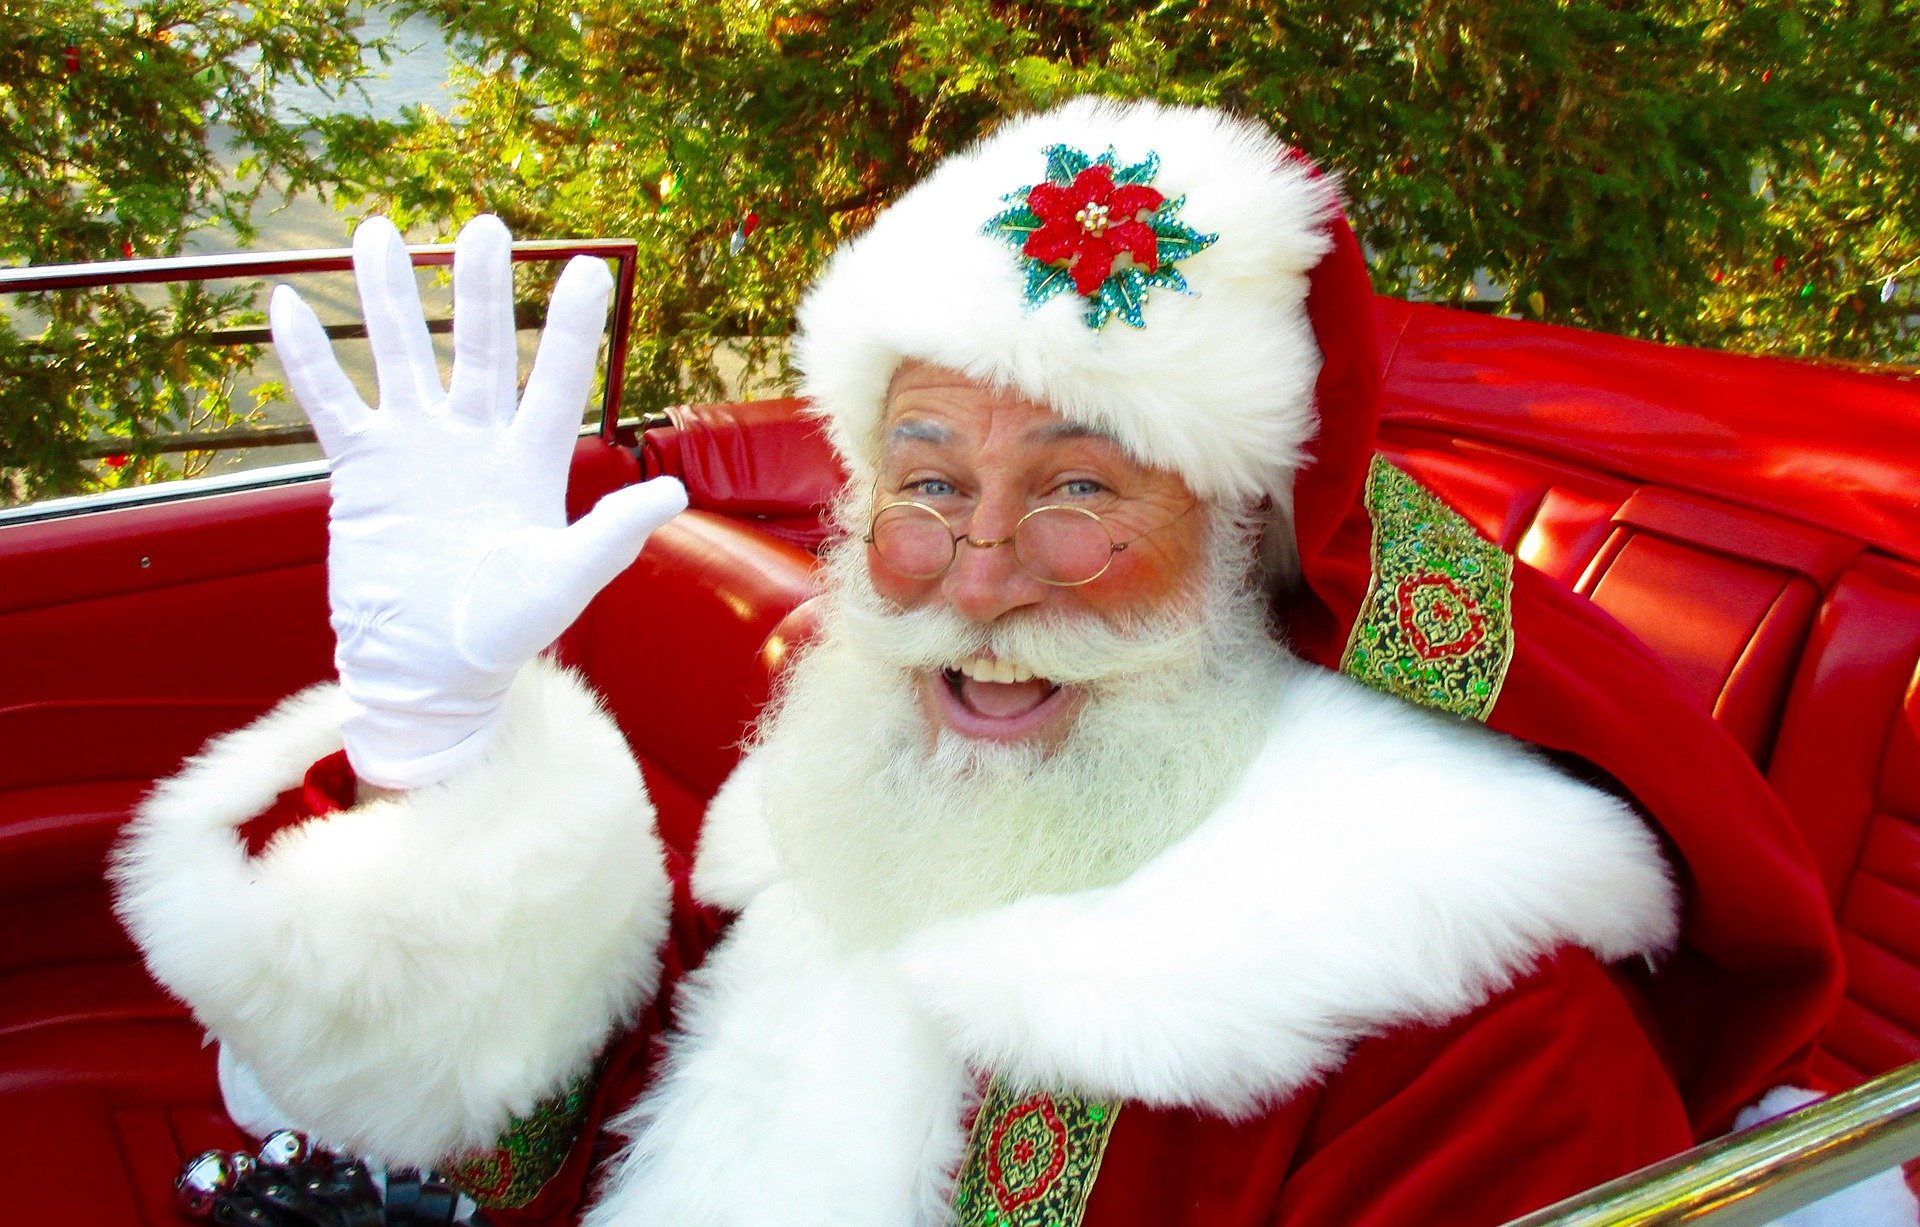 Santa Clause waving as he delivers presents in his slay. | Source: Pixabay.